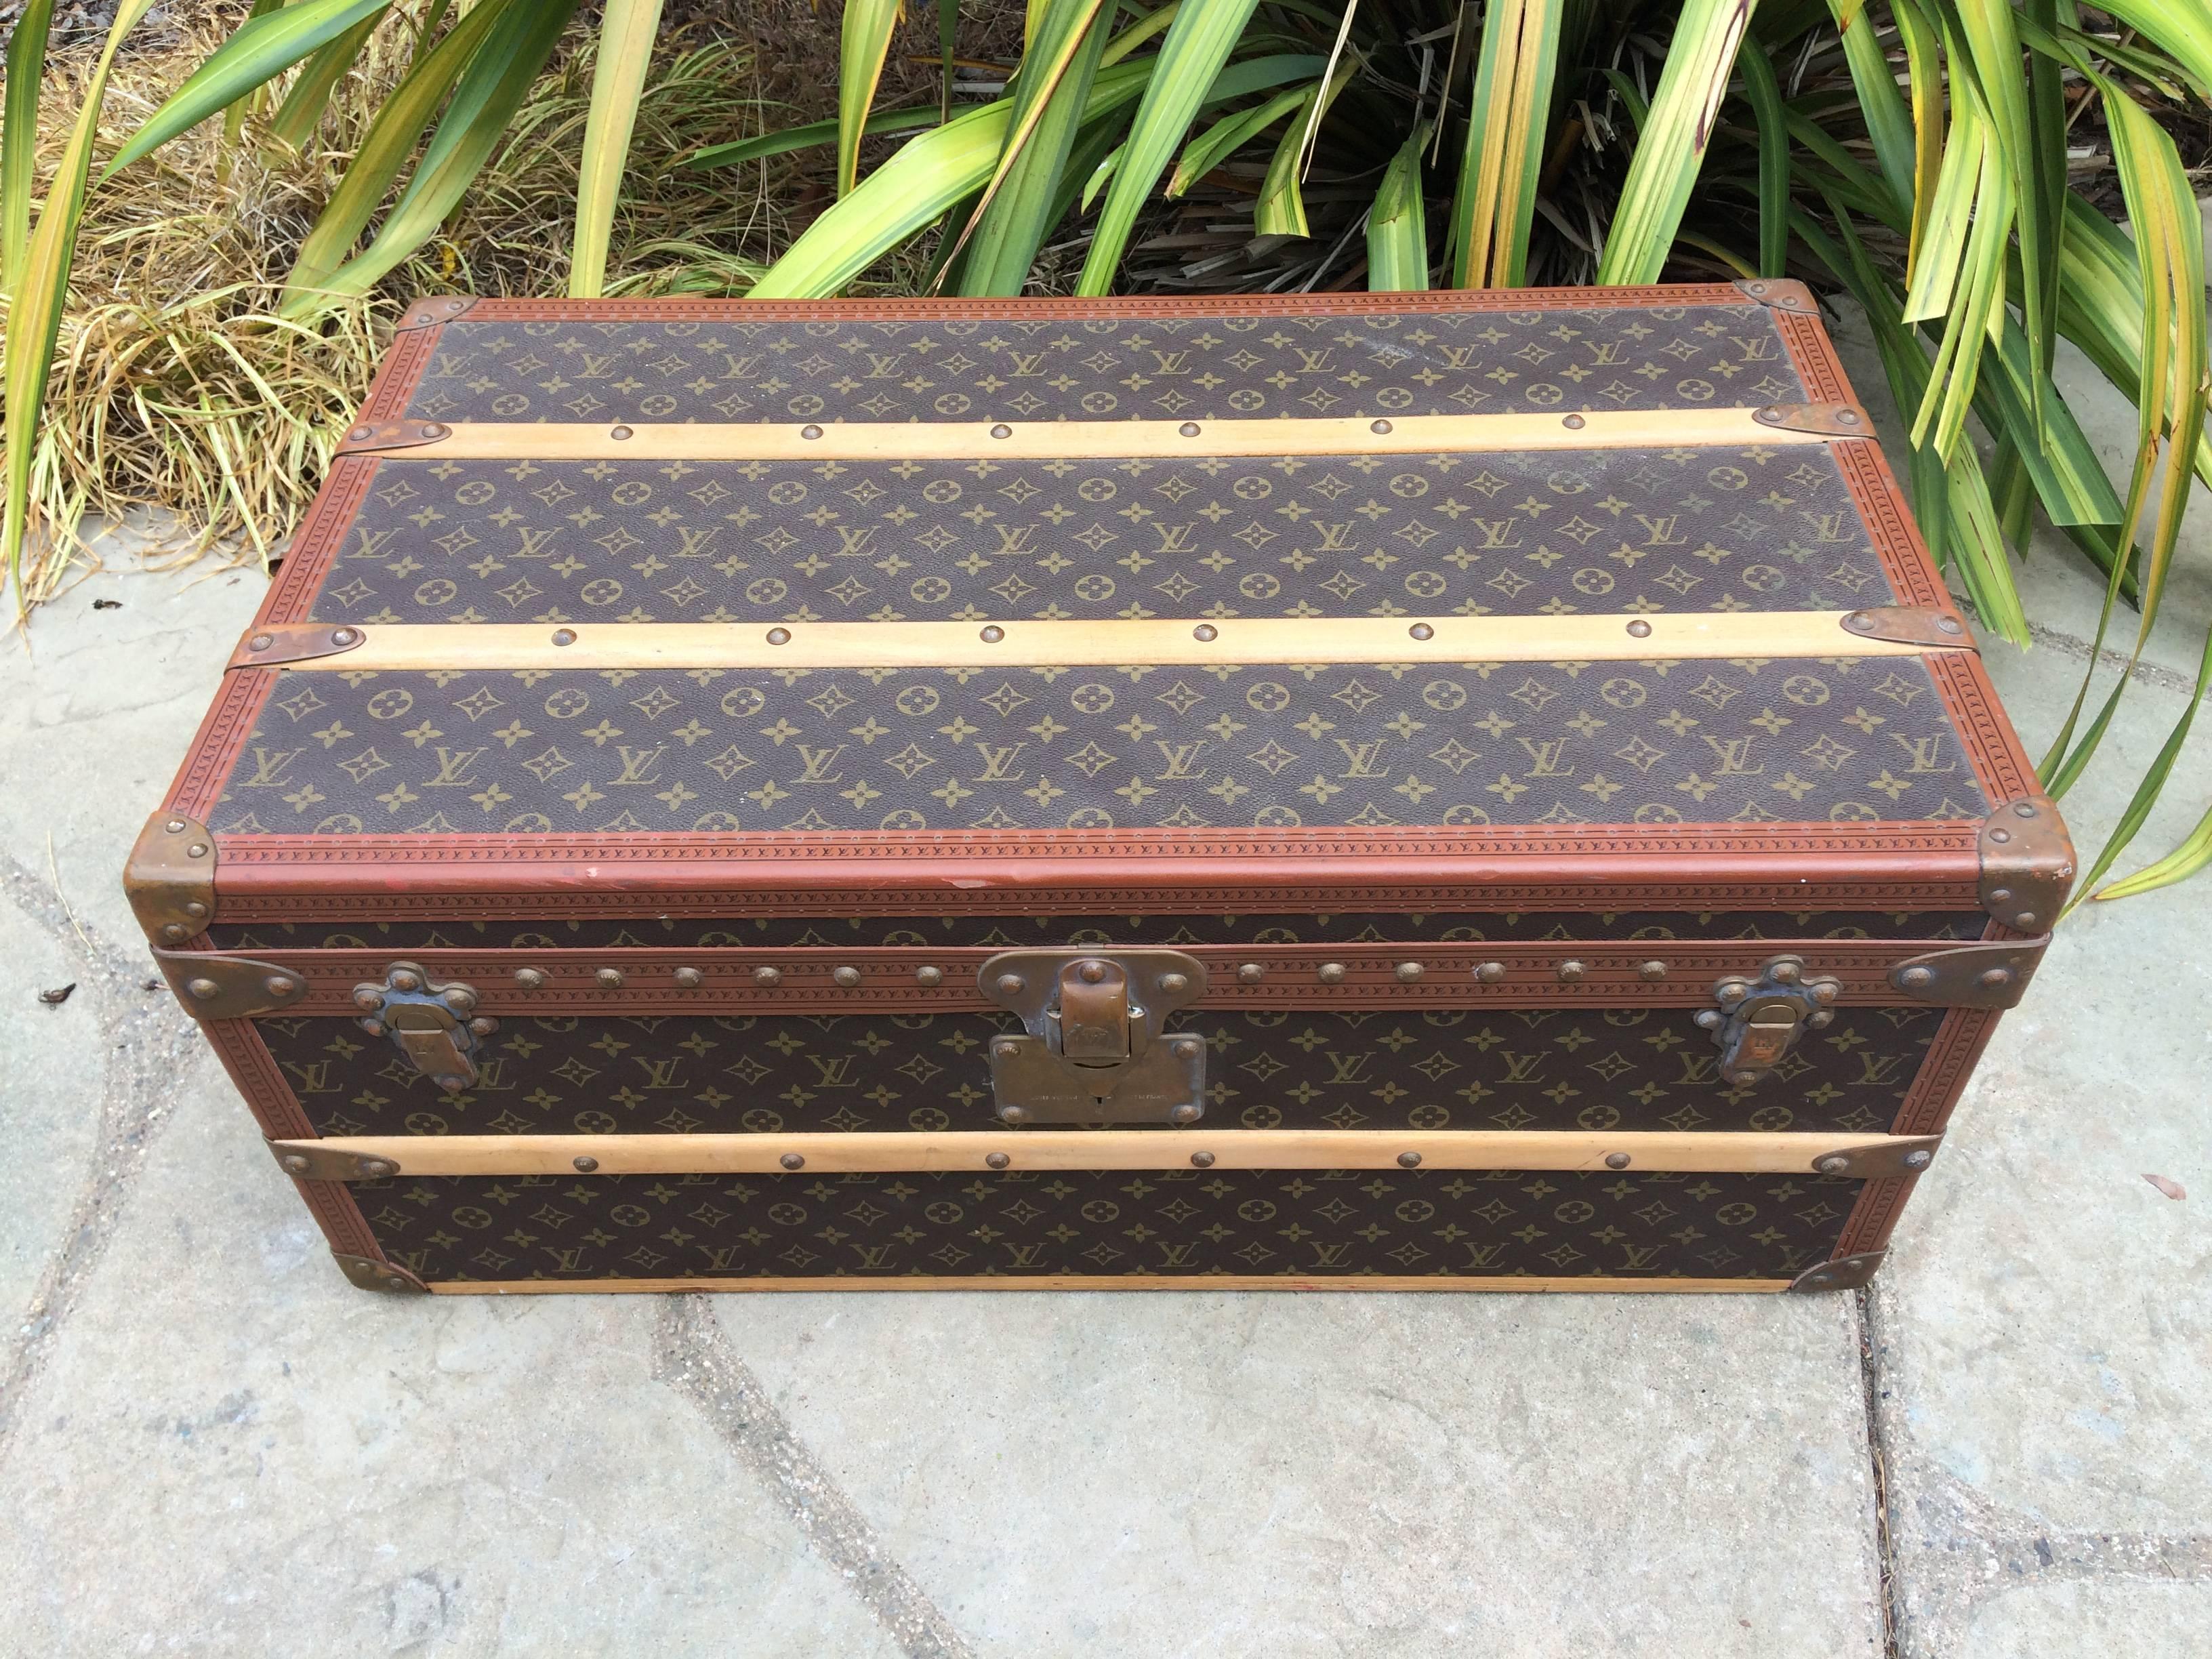 This gorgeous Louis Vuitton cabin trunk features Monogram canvas, LV lozine trim, stamped LV brass locks, LV stamped brass studs, brass corners, original leather side handles and two original working keys. It has got a warm and elegant patina.